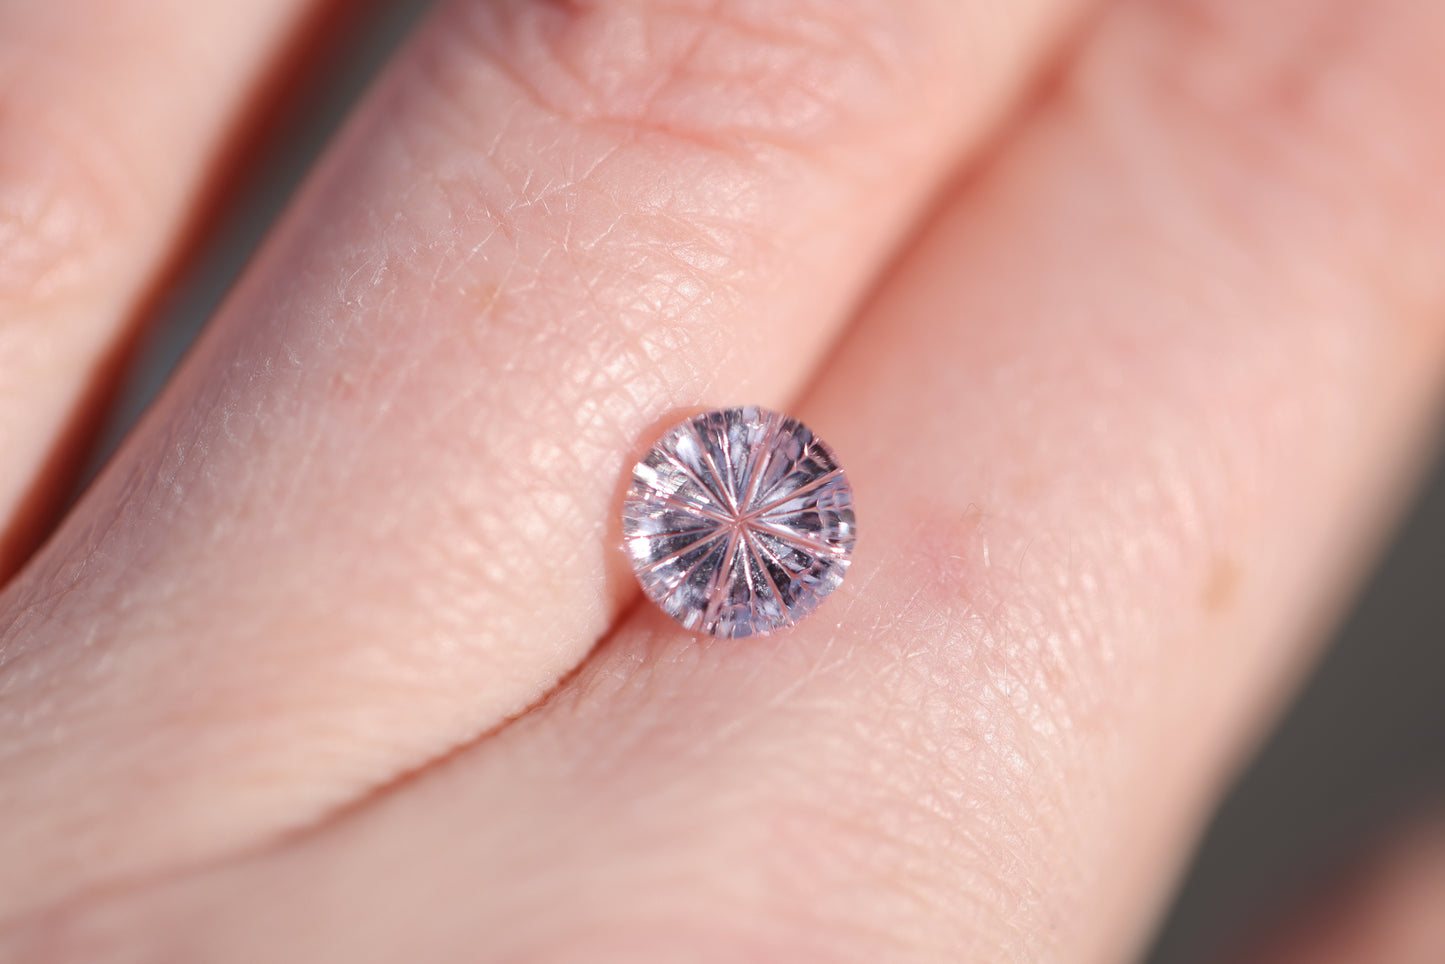 ON HOLD 1.93ct round light pink sapphire - Starbrite cut by John Dyer